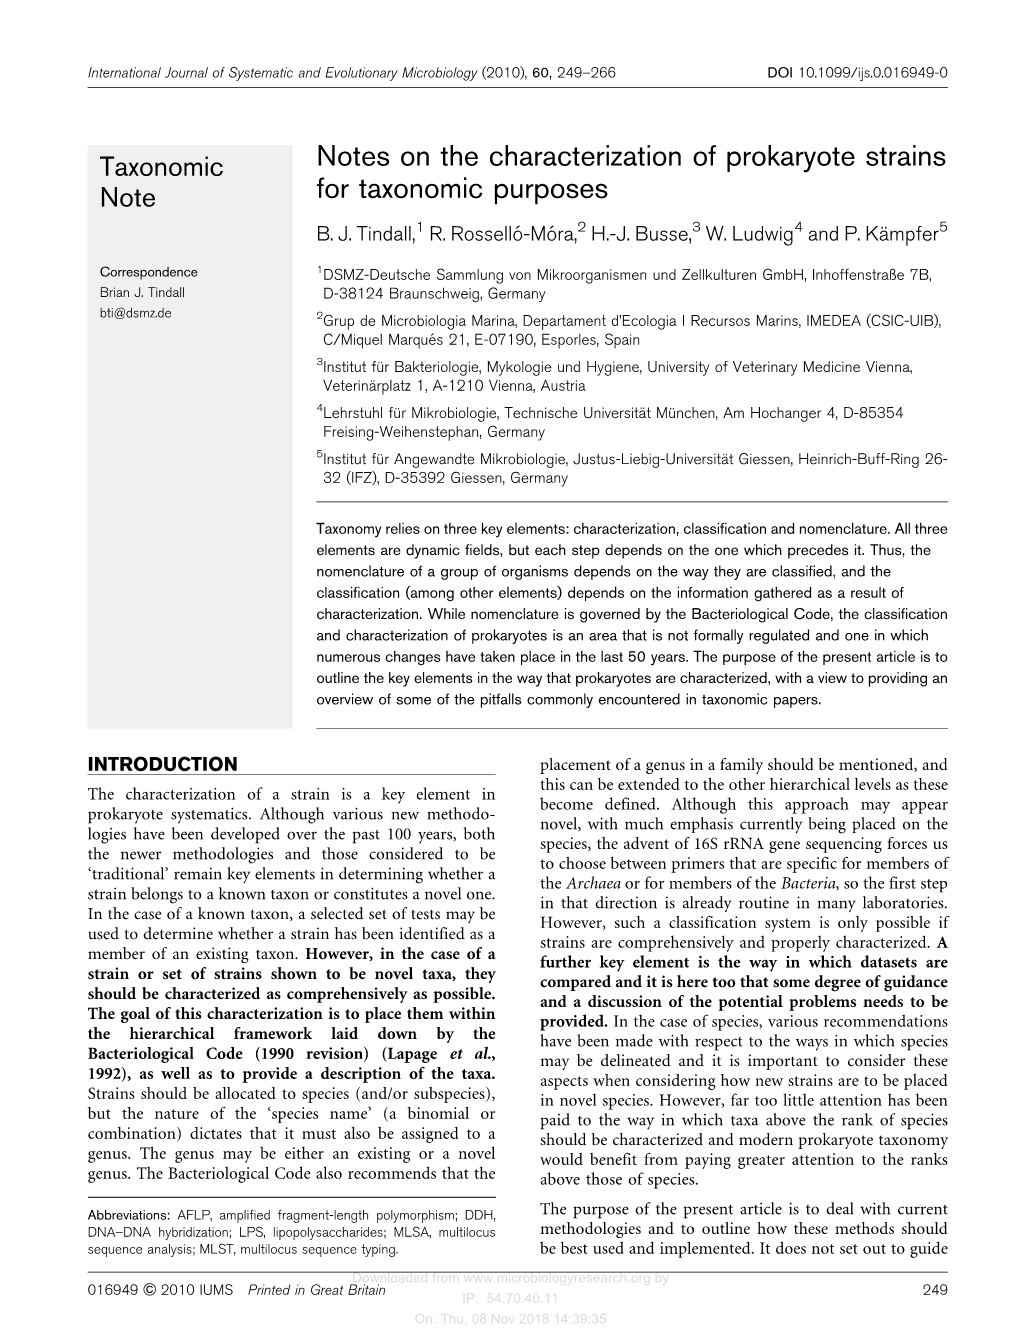 Notes on the Characterization of Prokaryote Strains Note for Taxonomic Purposes B